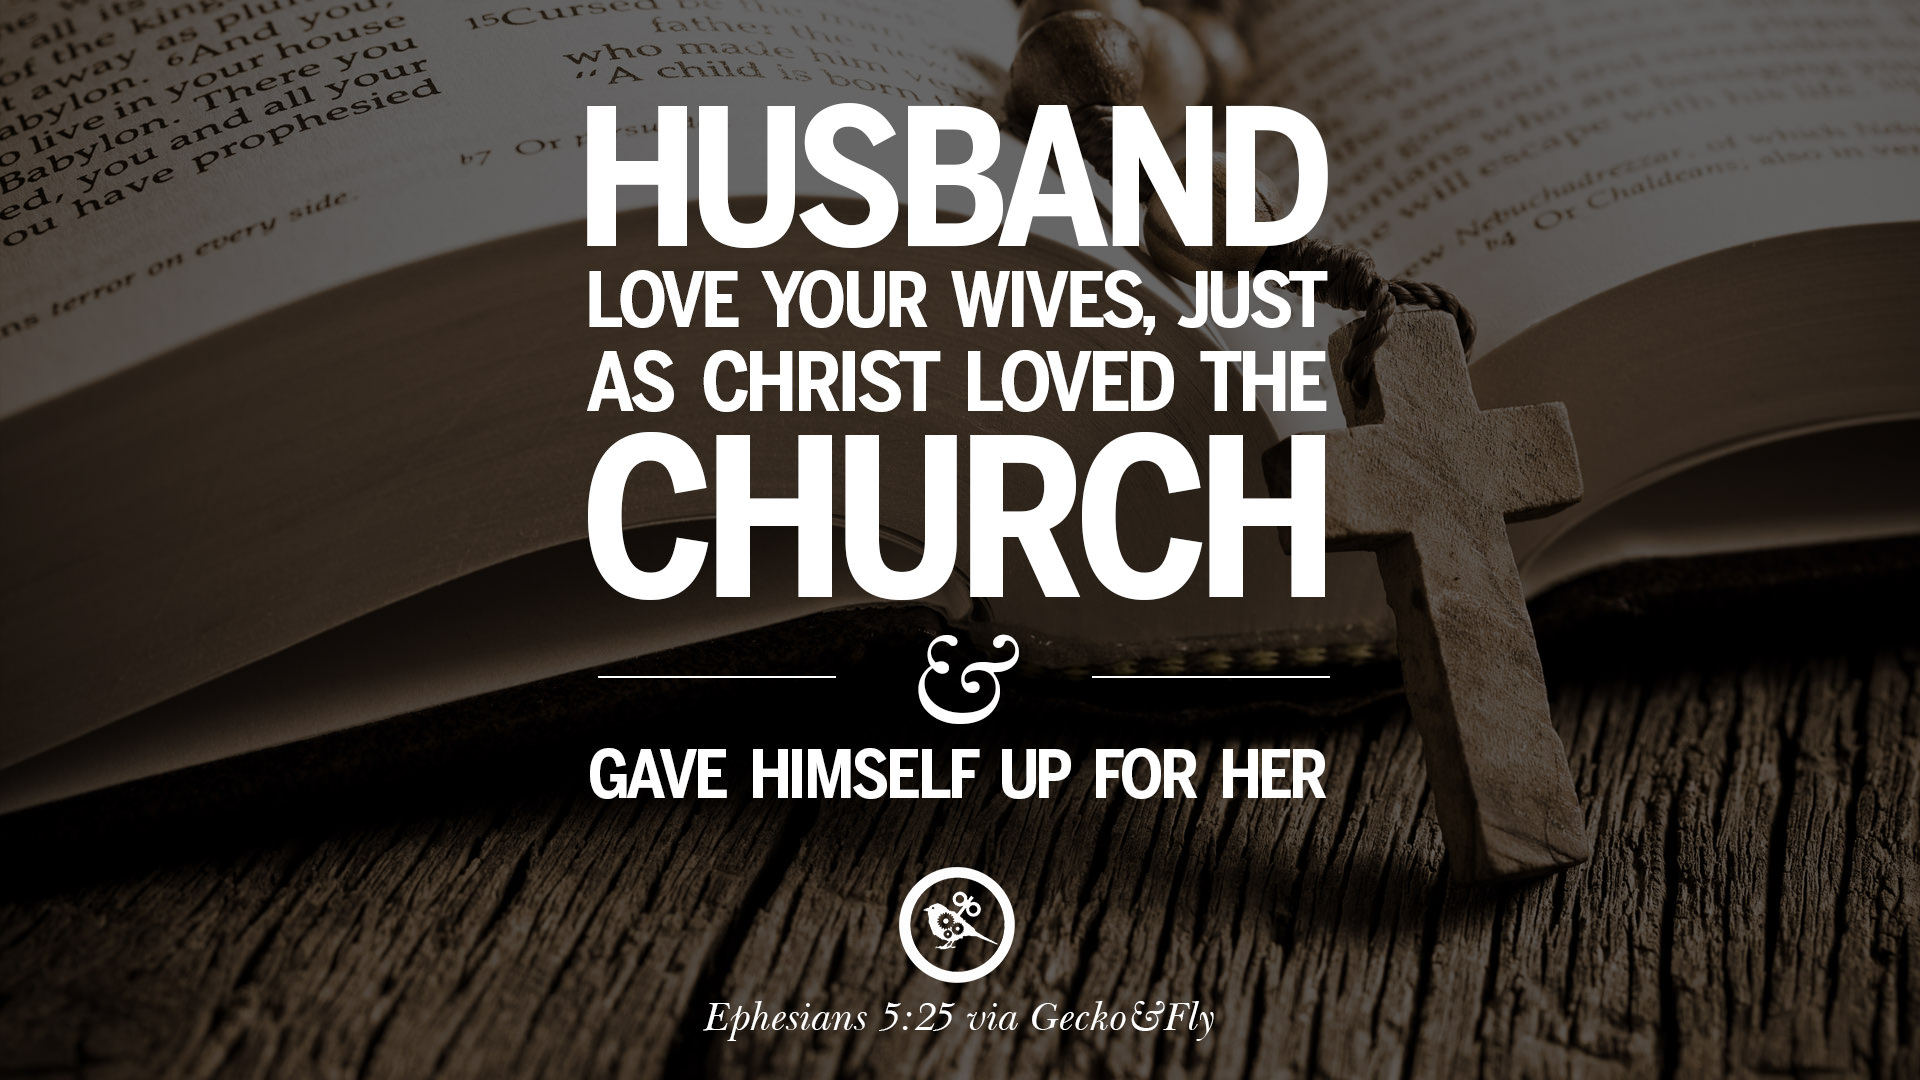 Husband love your wives just as Christ loved the church and gave himself up for her – Ephesians 5 25